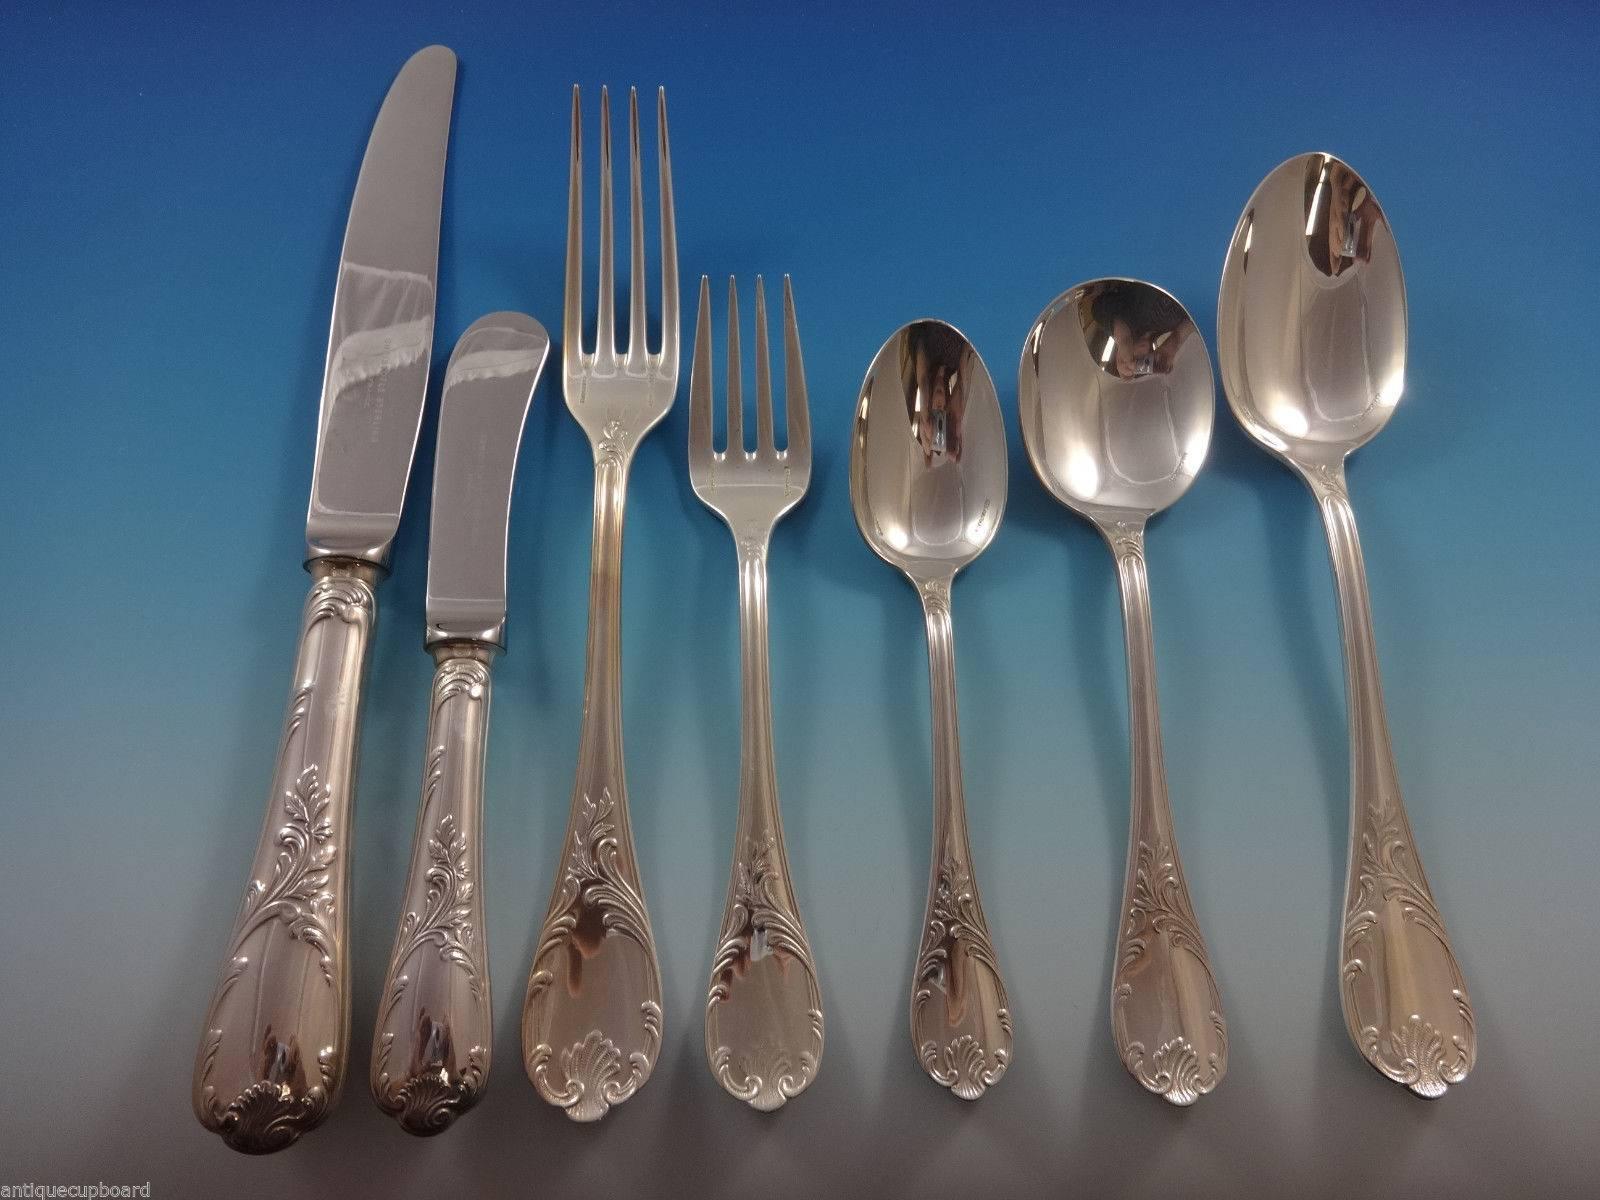 Marly by Christofle sterling set.

Christofle French silver flatware has been crafted by master artisans since 1830. The revolutionary style and character of Christofle dinnerware comes from collaborations with groundbreaking architects, designers